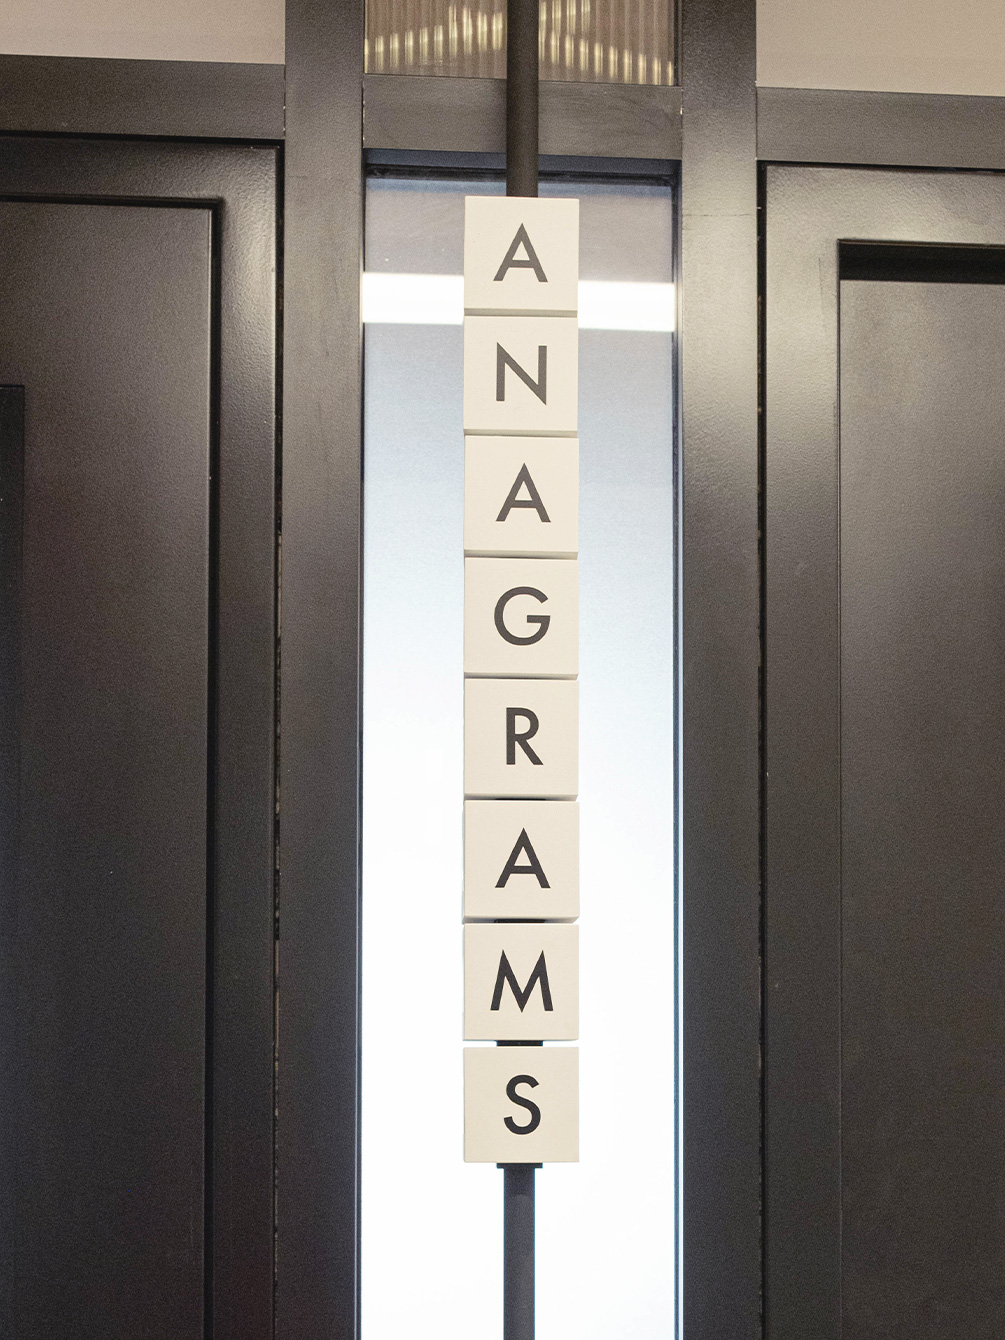 Signage at Anagrams Cafe